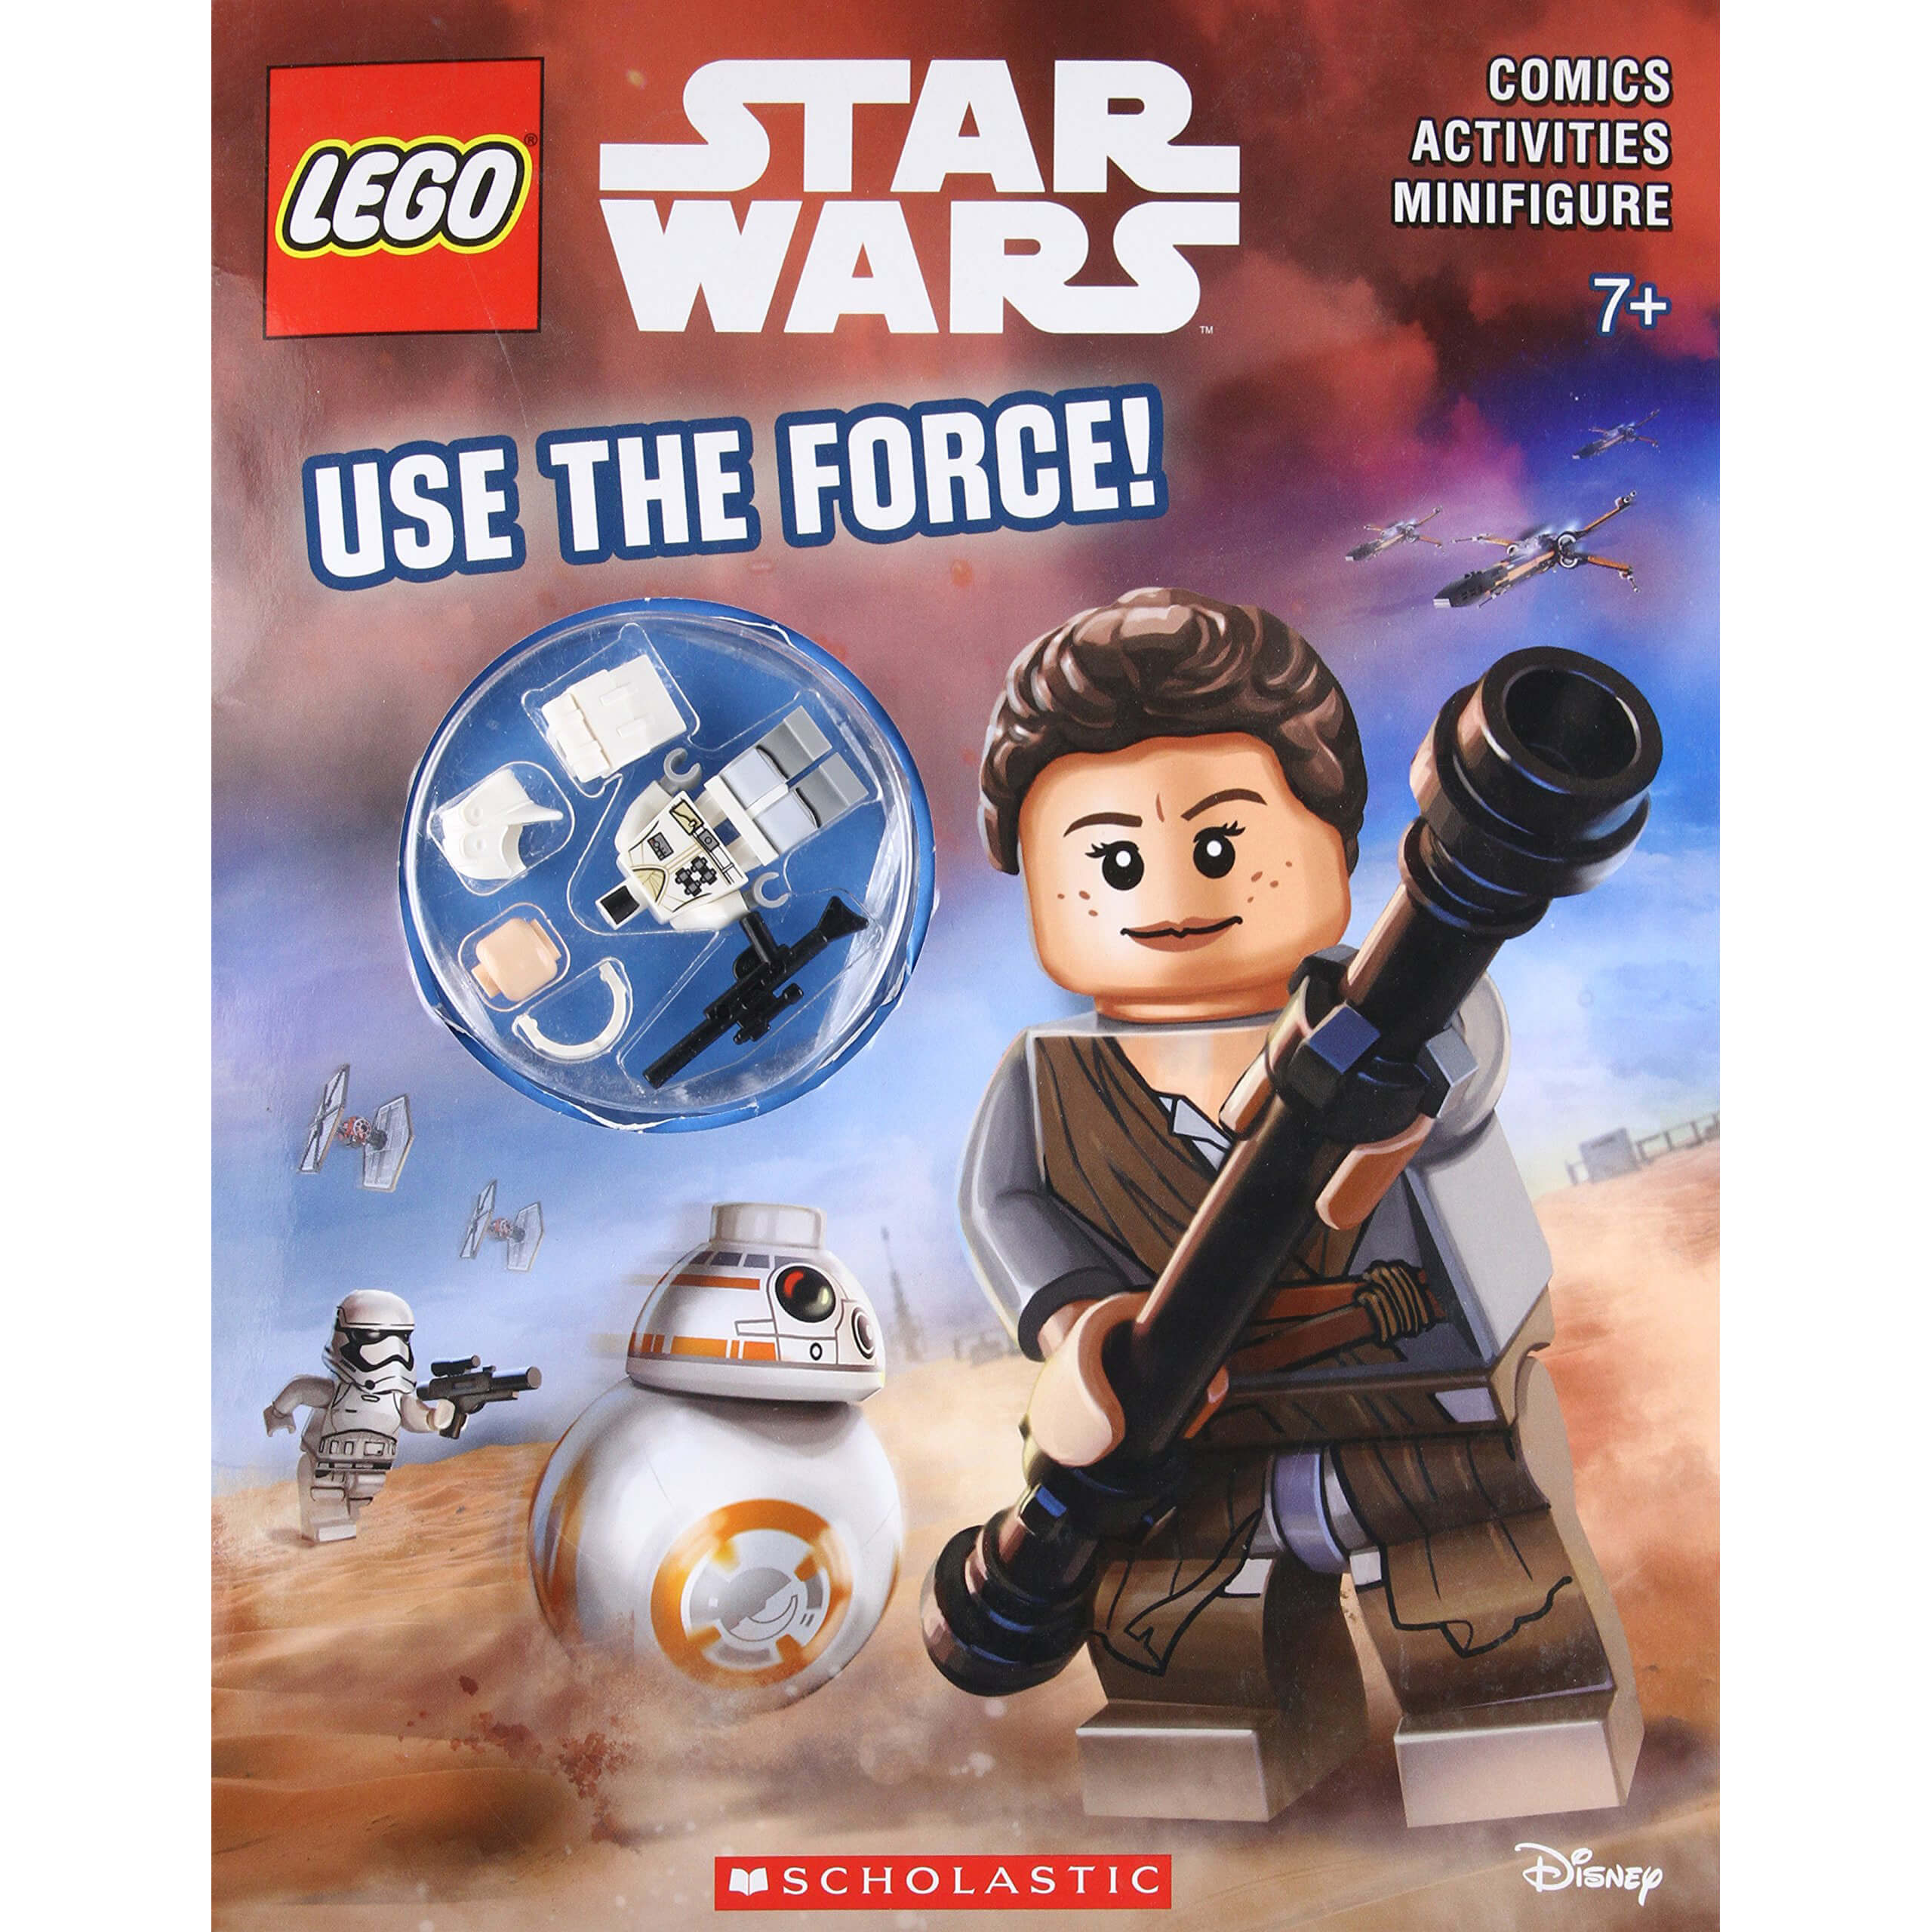 LEGO Star Wars: Use the Force! (Activity Book)